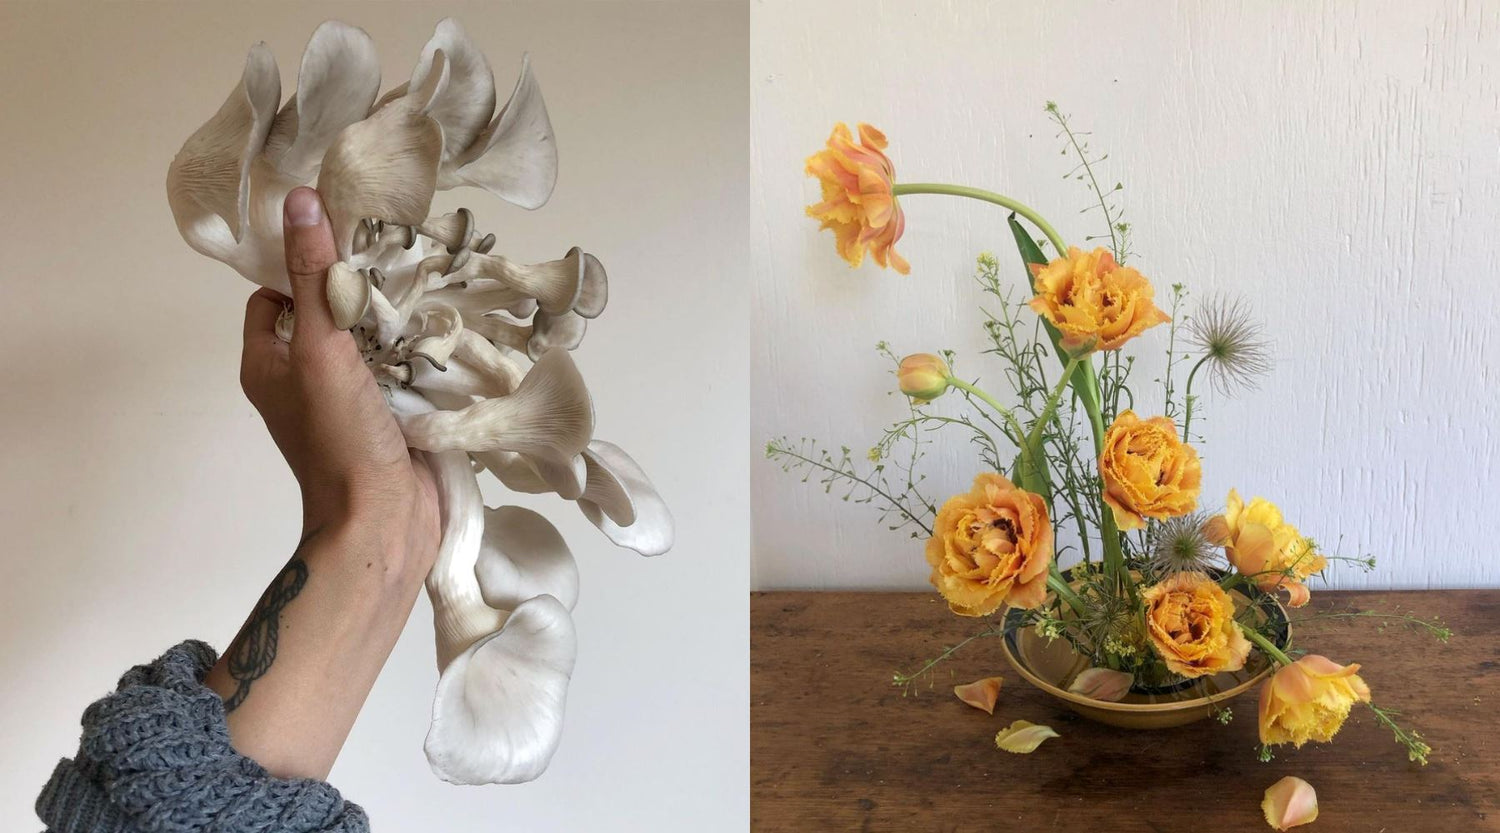 Left: a hand holding up a bunch of mushrooms; Right: a bouquet of orange flowers